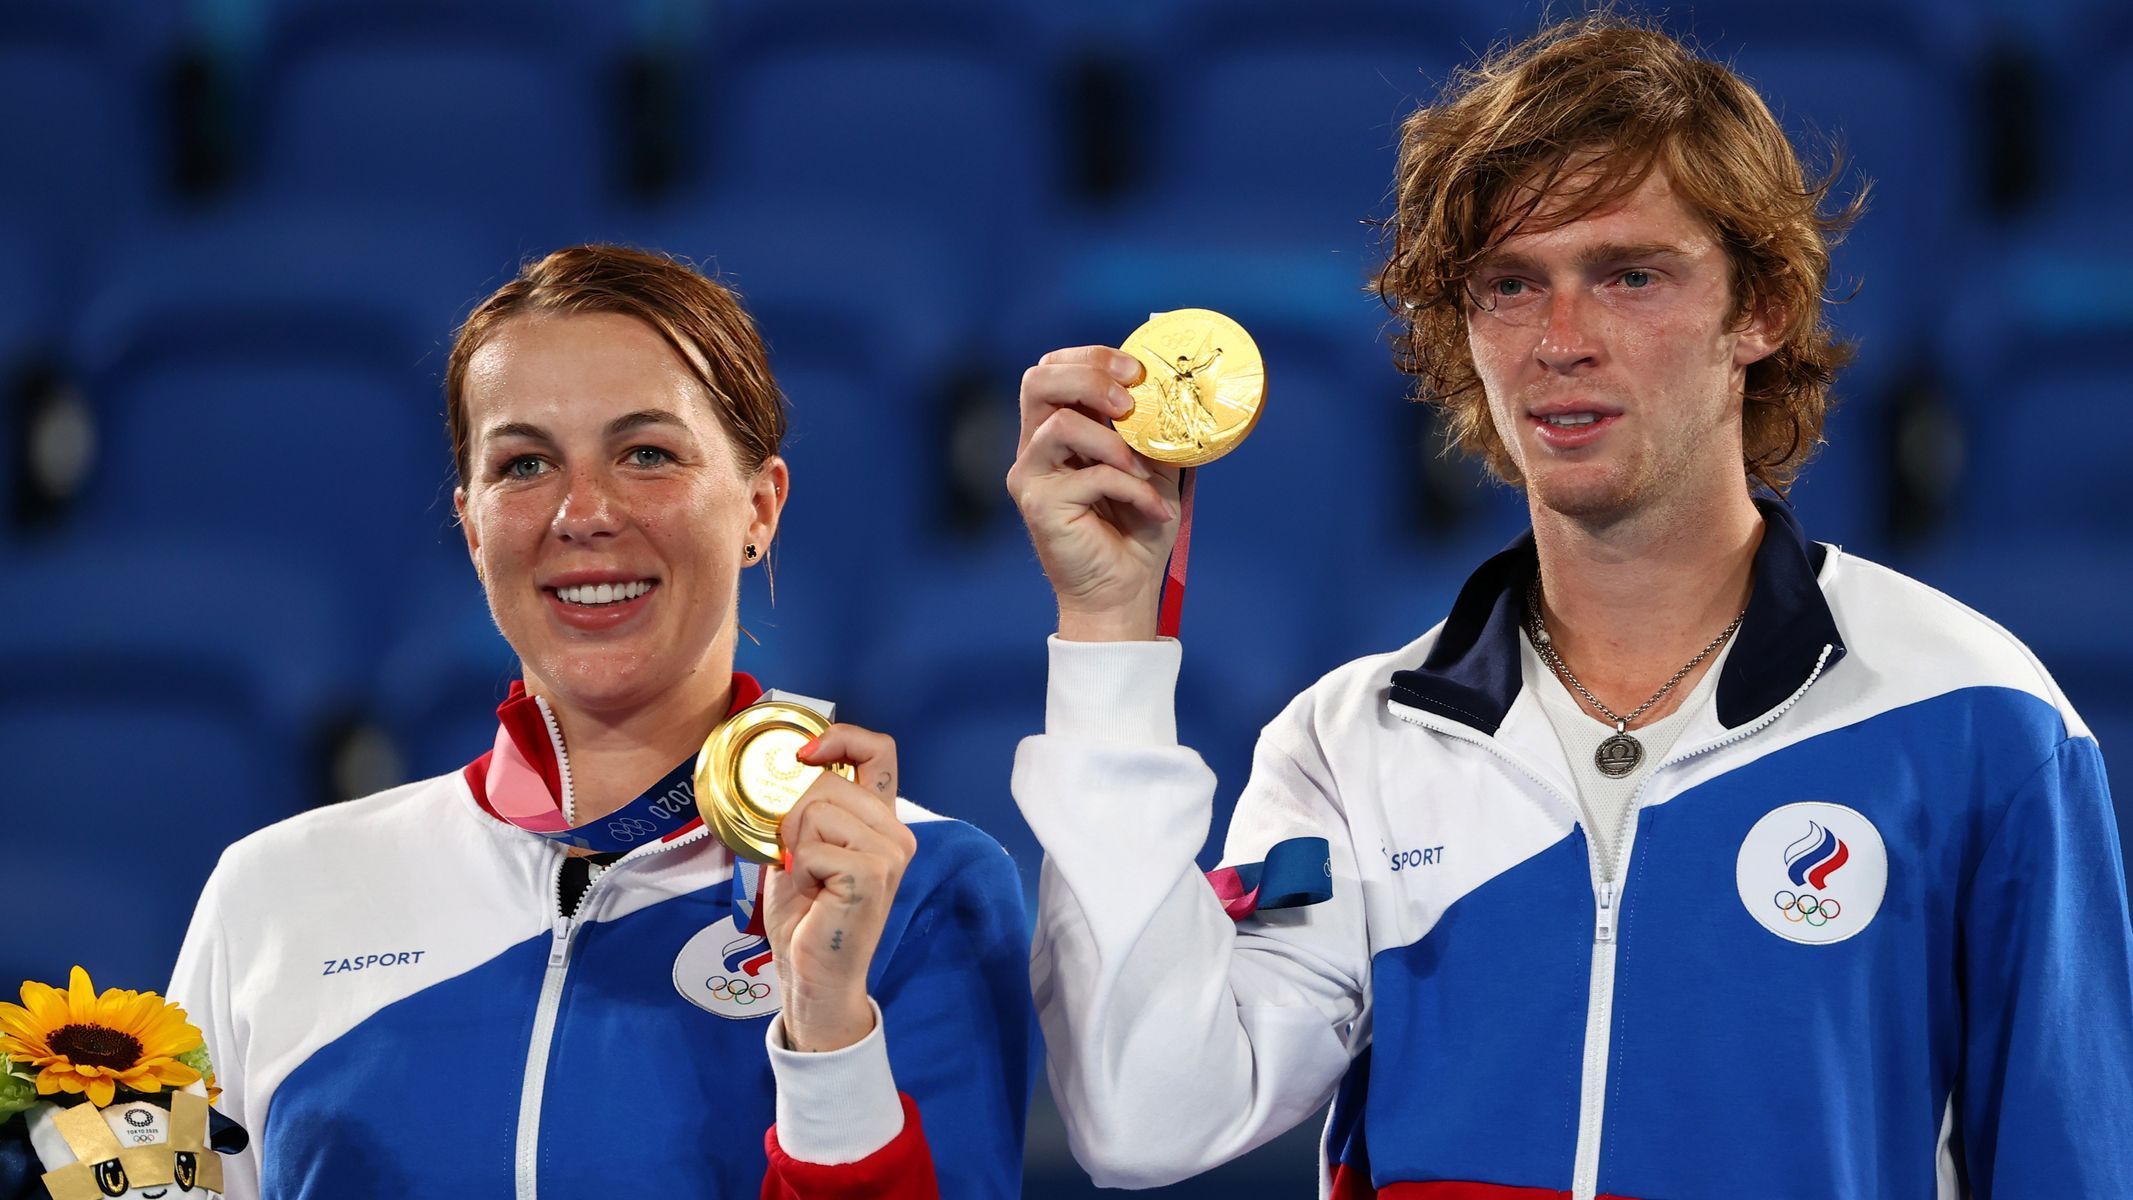 Tennis - Mixed Doubles - Medal Ceremony